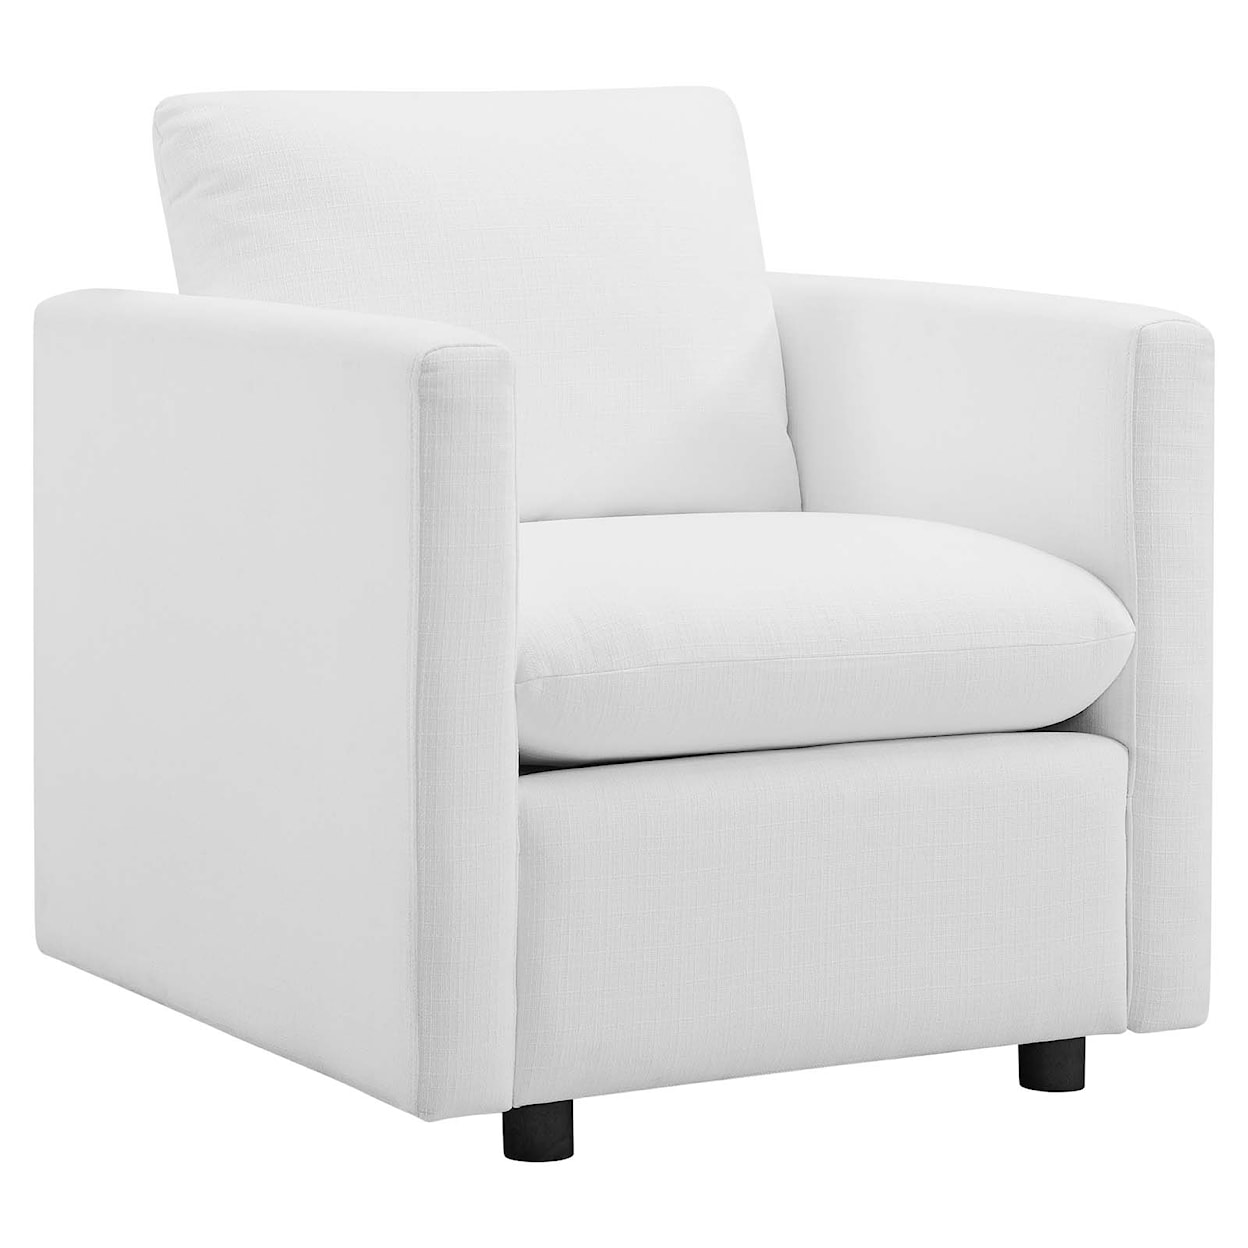 Modway Activate Armchair